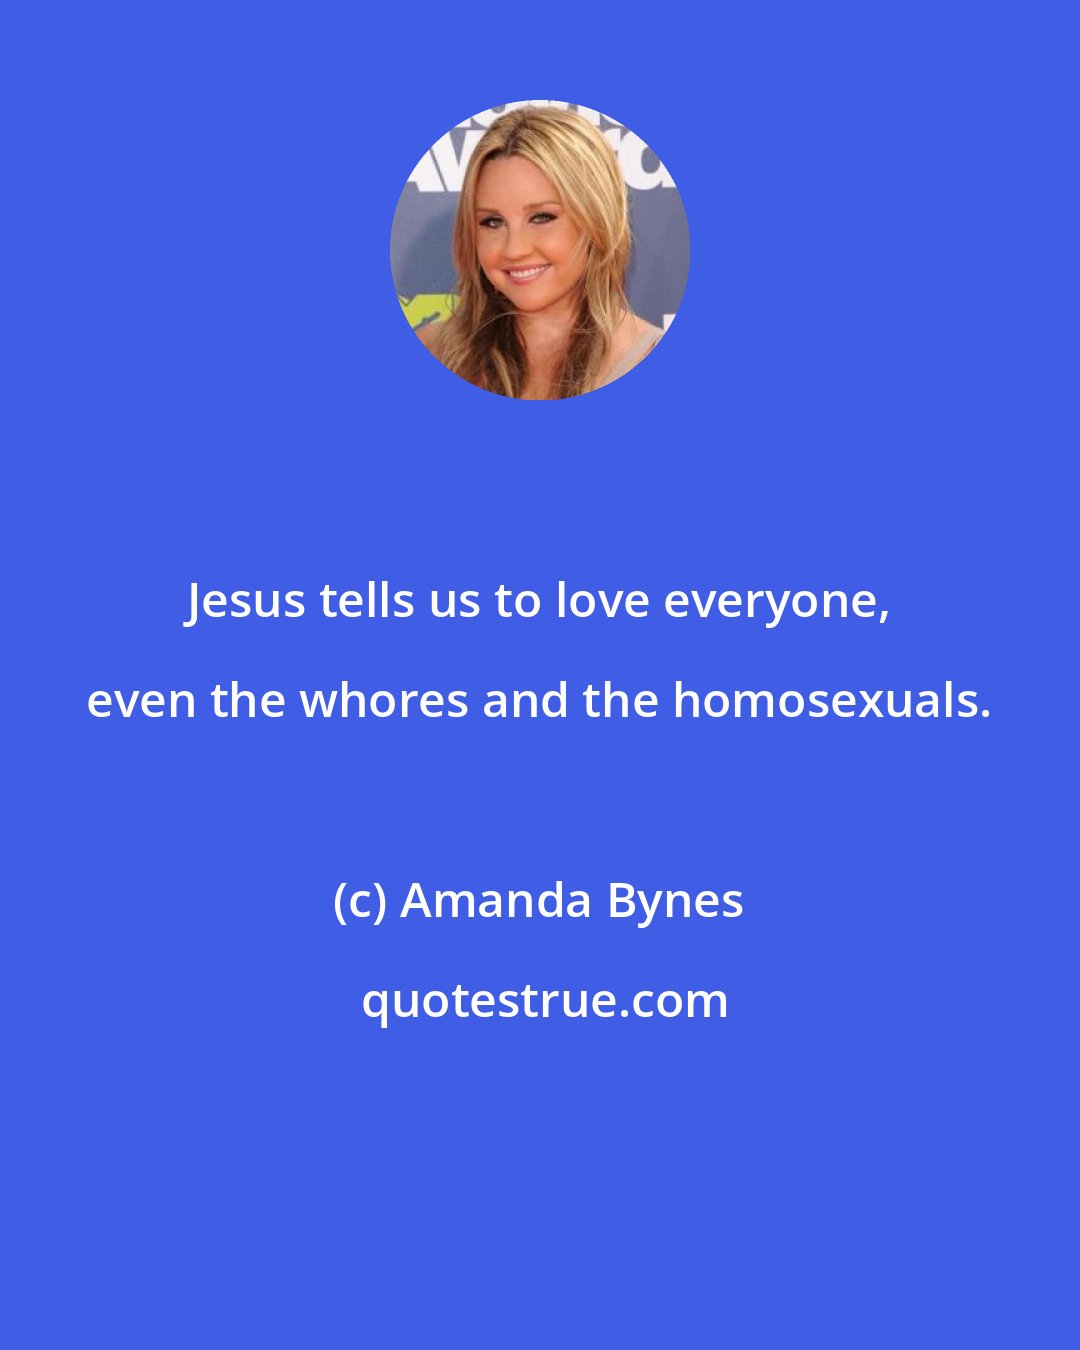 Amanda Bynes: Jesus tells us to love everyone, even the whores and the homosexuals.